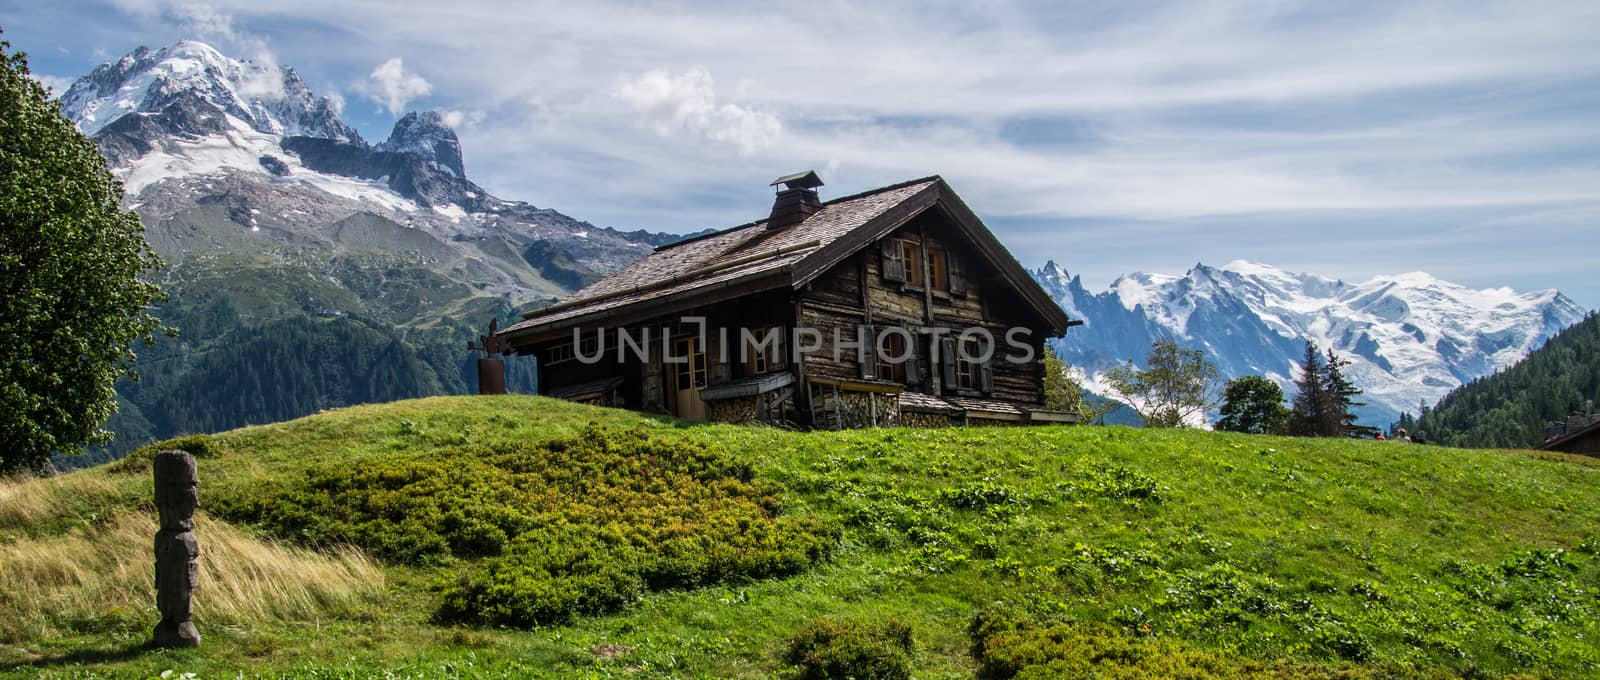 landscape of french alps by bertrand